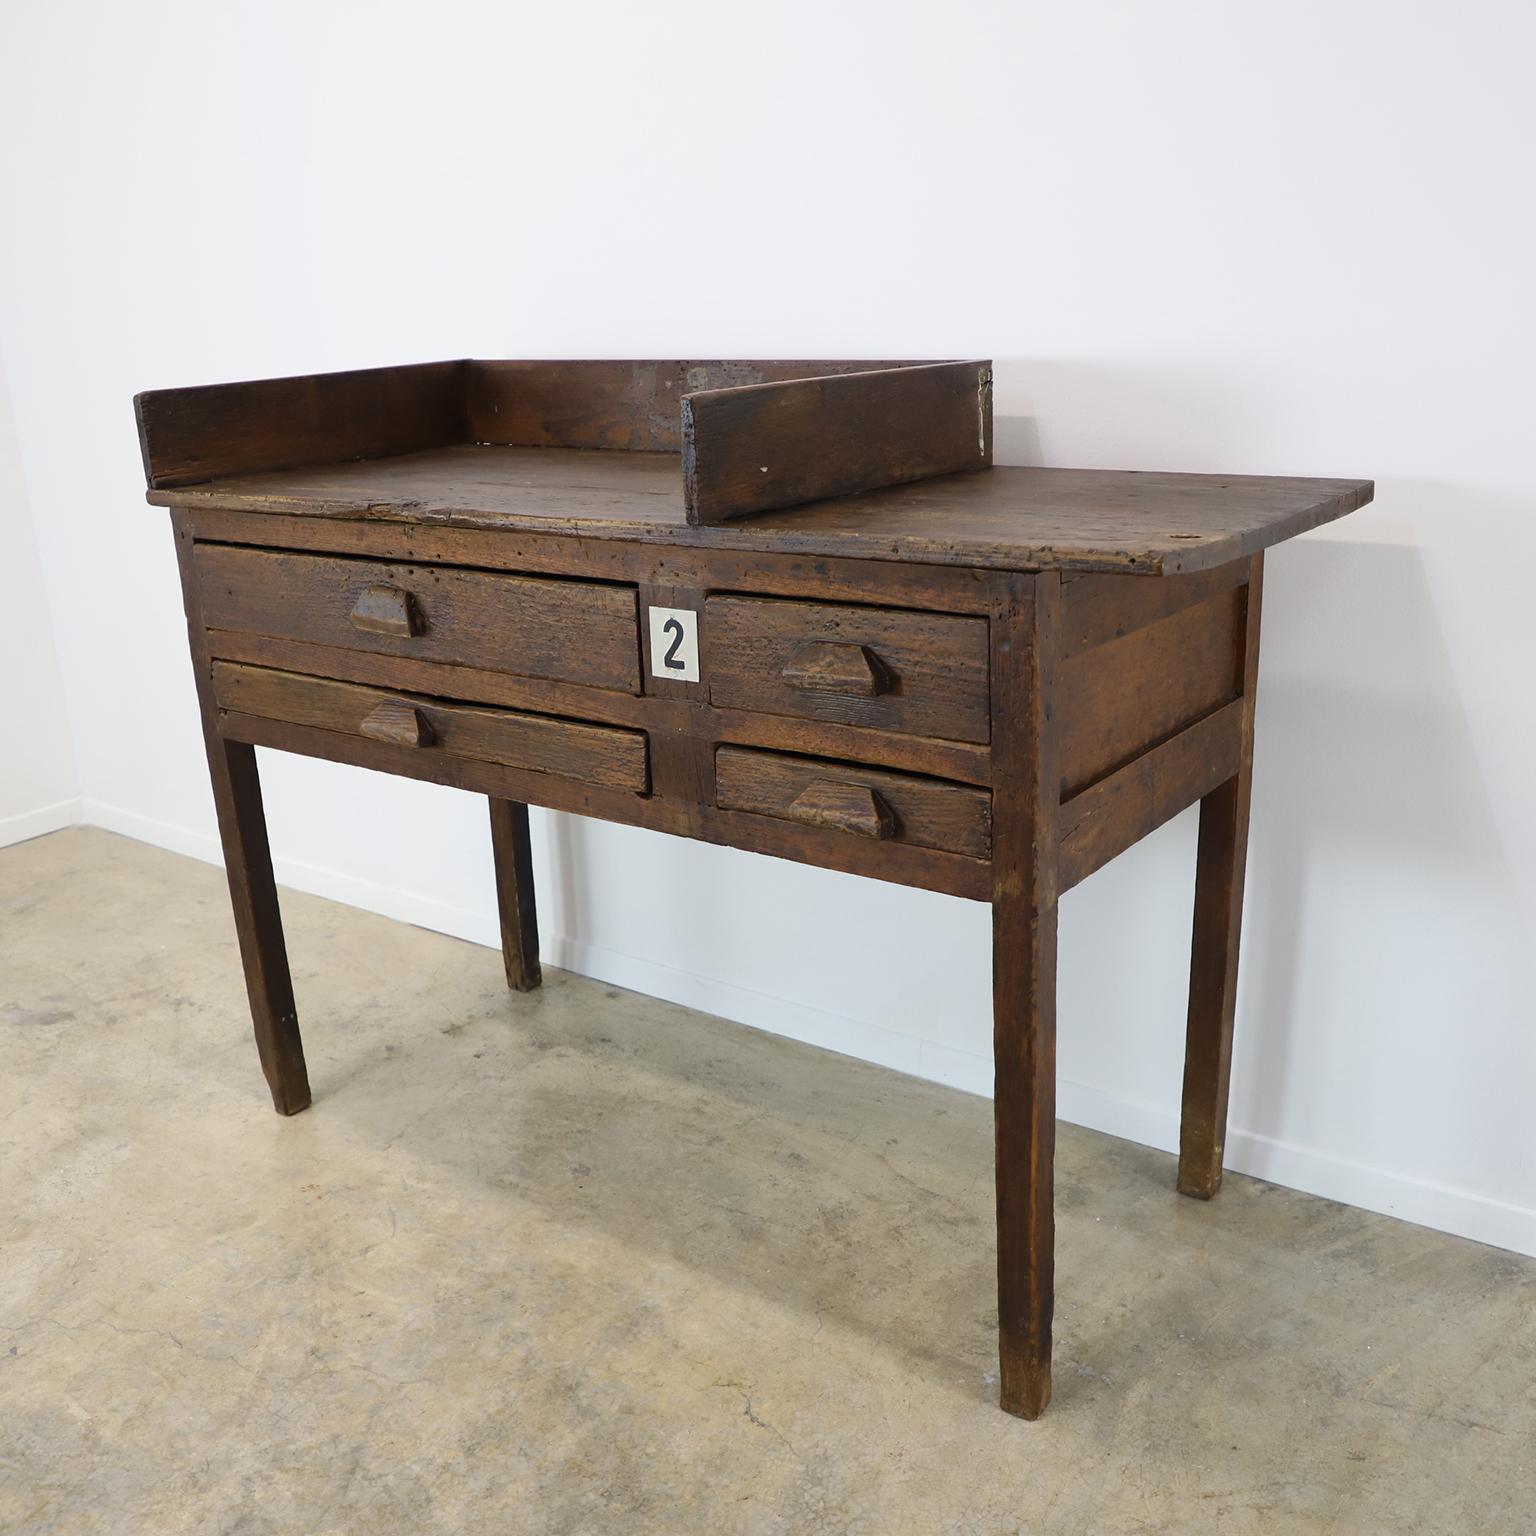 Circa 1930. We offer a most unique antique Mexican Industrial Jeweler's Bench Work Table with outstanding patina.

The stool and the typewriter is not included.